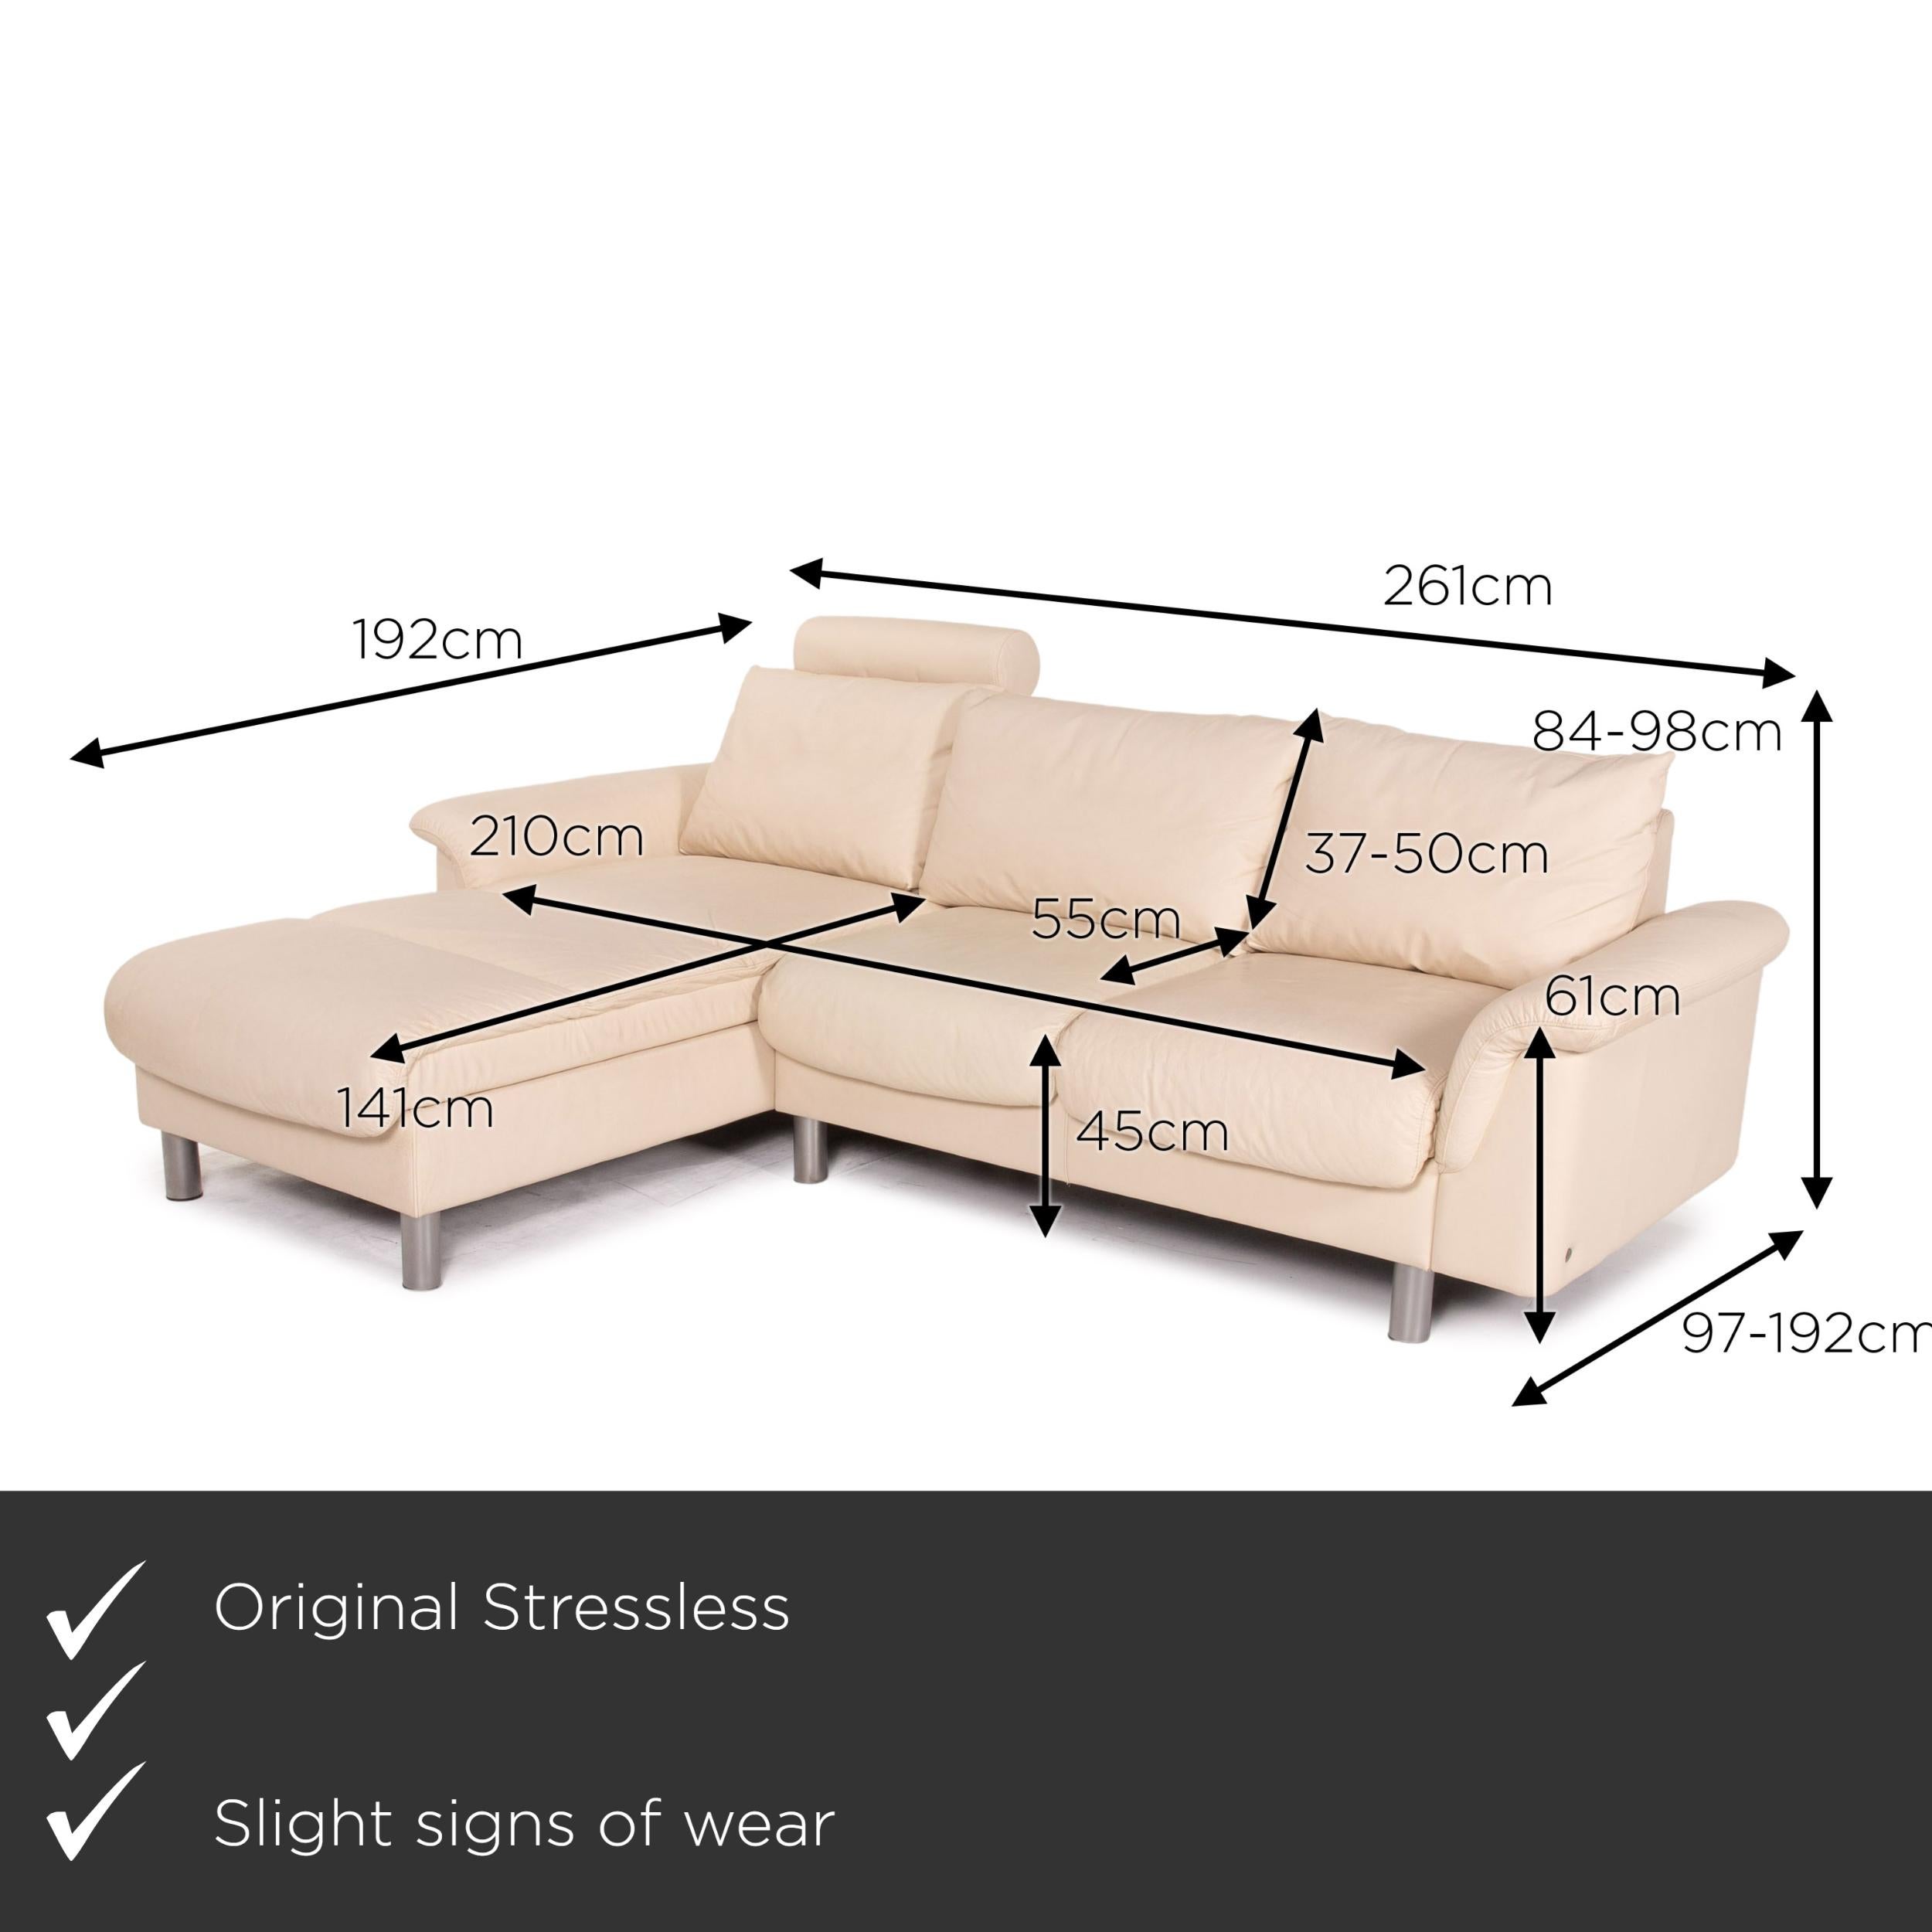 We present to you a Stressless E300 leather corner sofa cream sofa function couch.
 

 Product measurements in centimeters:
 

Depth: 97
Width: 261
Height: 84
Seat height: 45
Rest height: 61
Seat depth: 141
Seat width: 210
Back height: